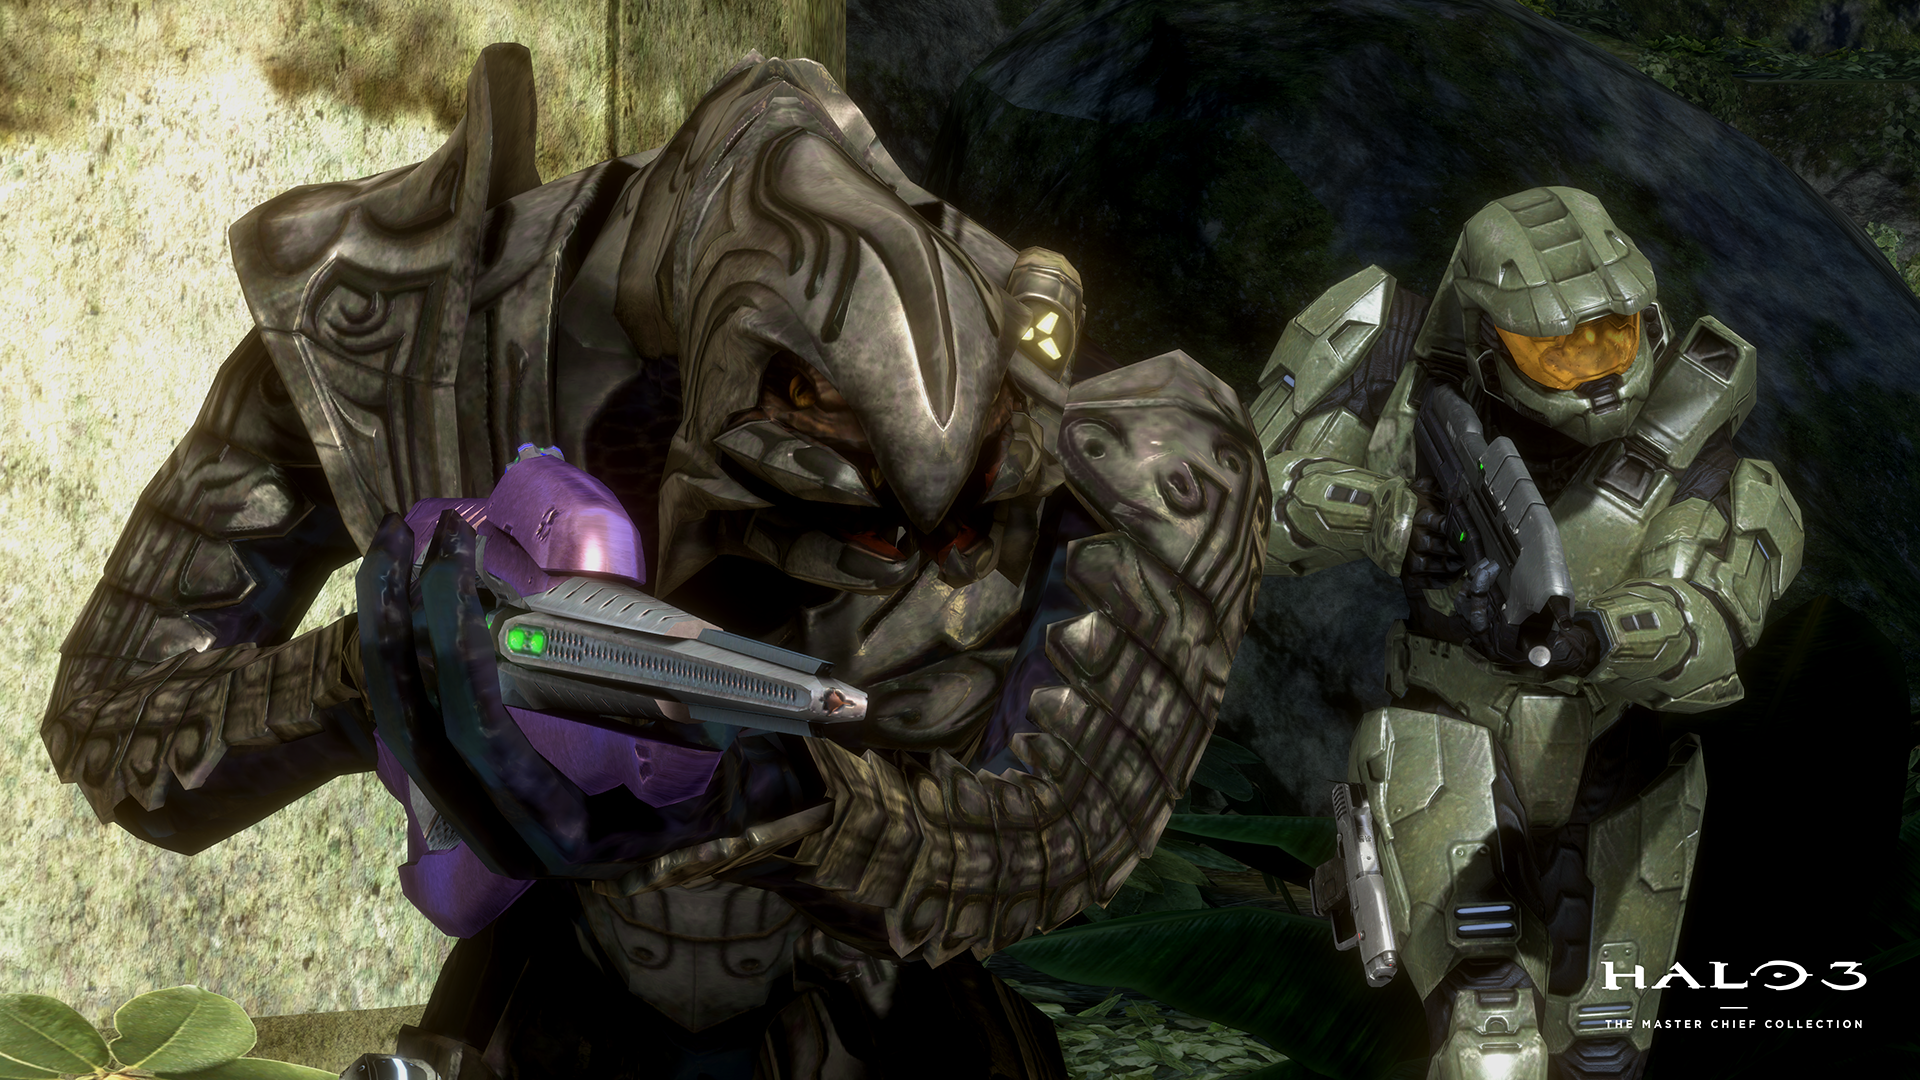 Image for Halo 3 in Master Chief Collection PC is a reminder that it remains the game Infinite must surpass